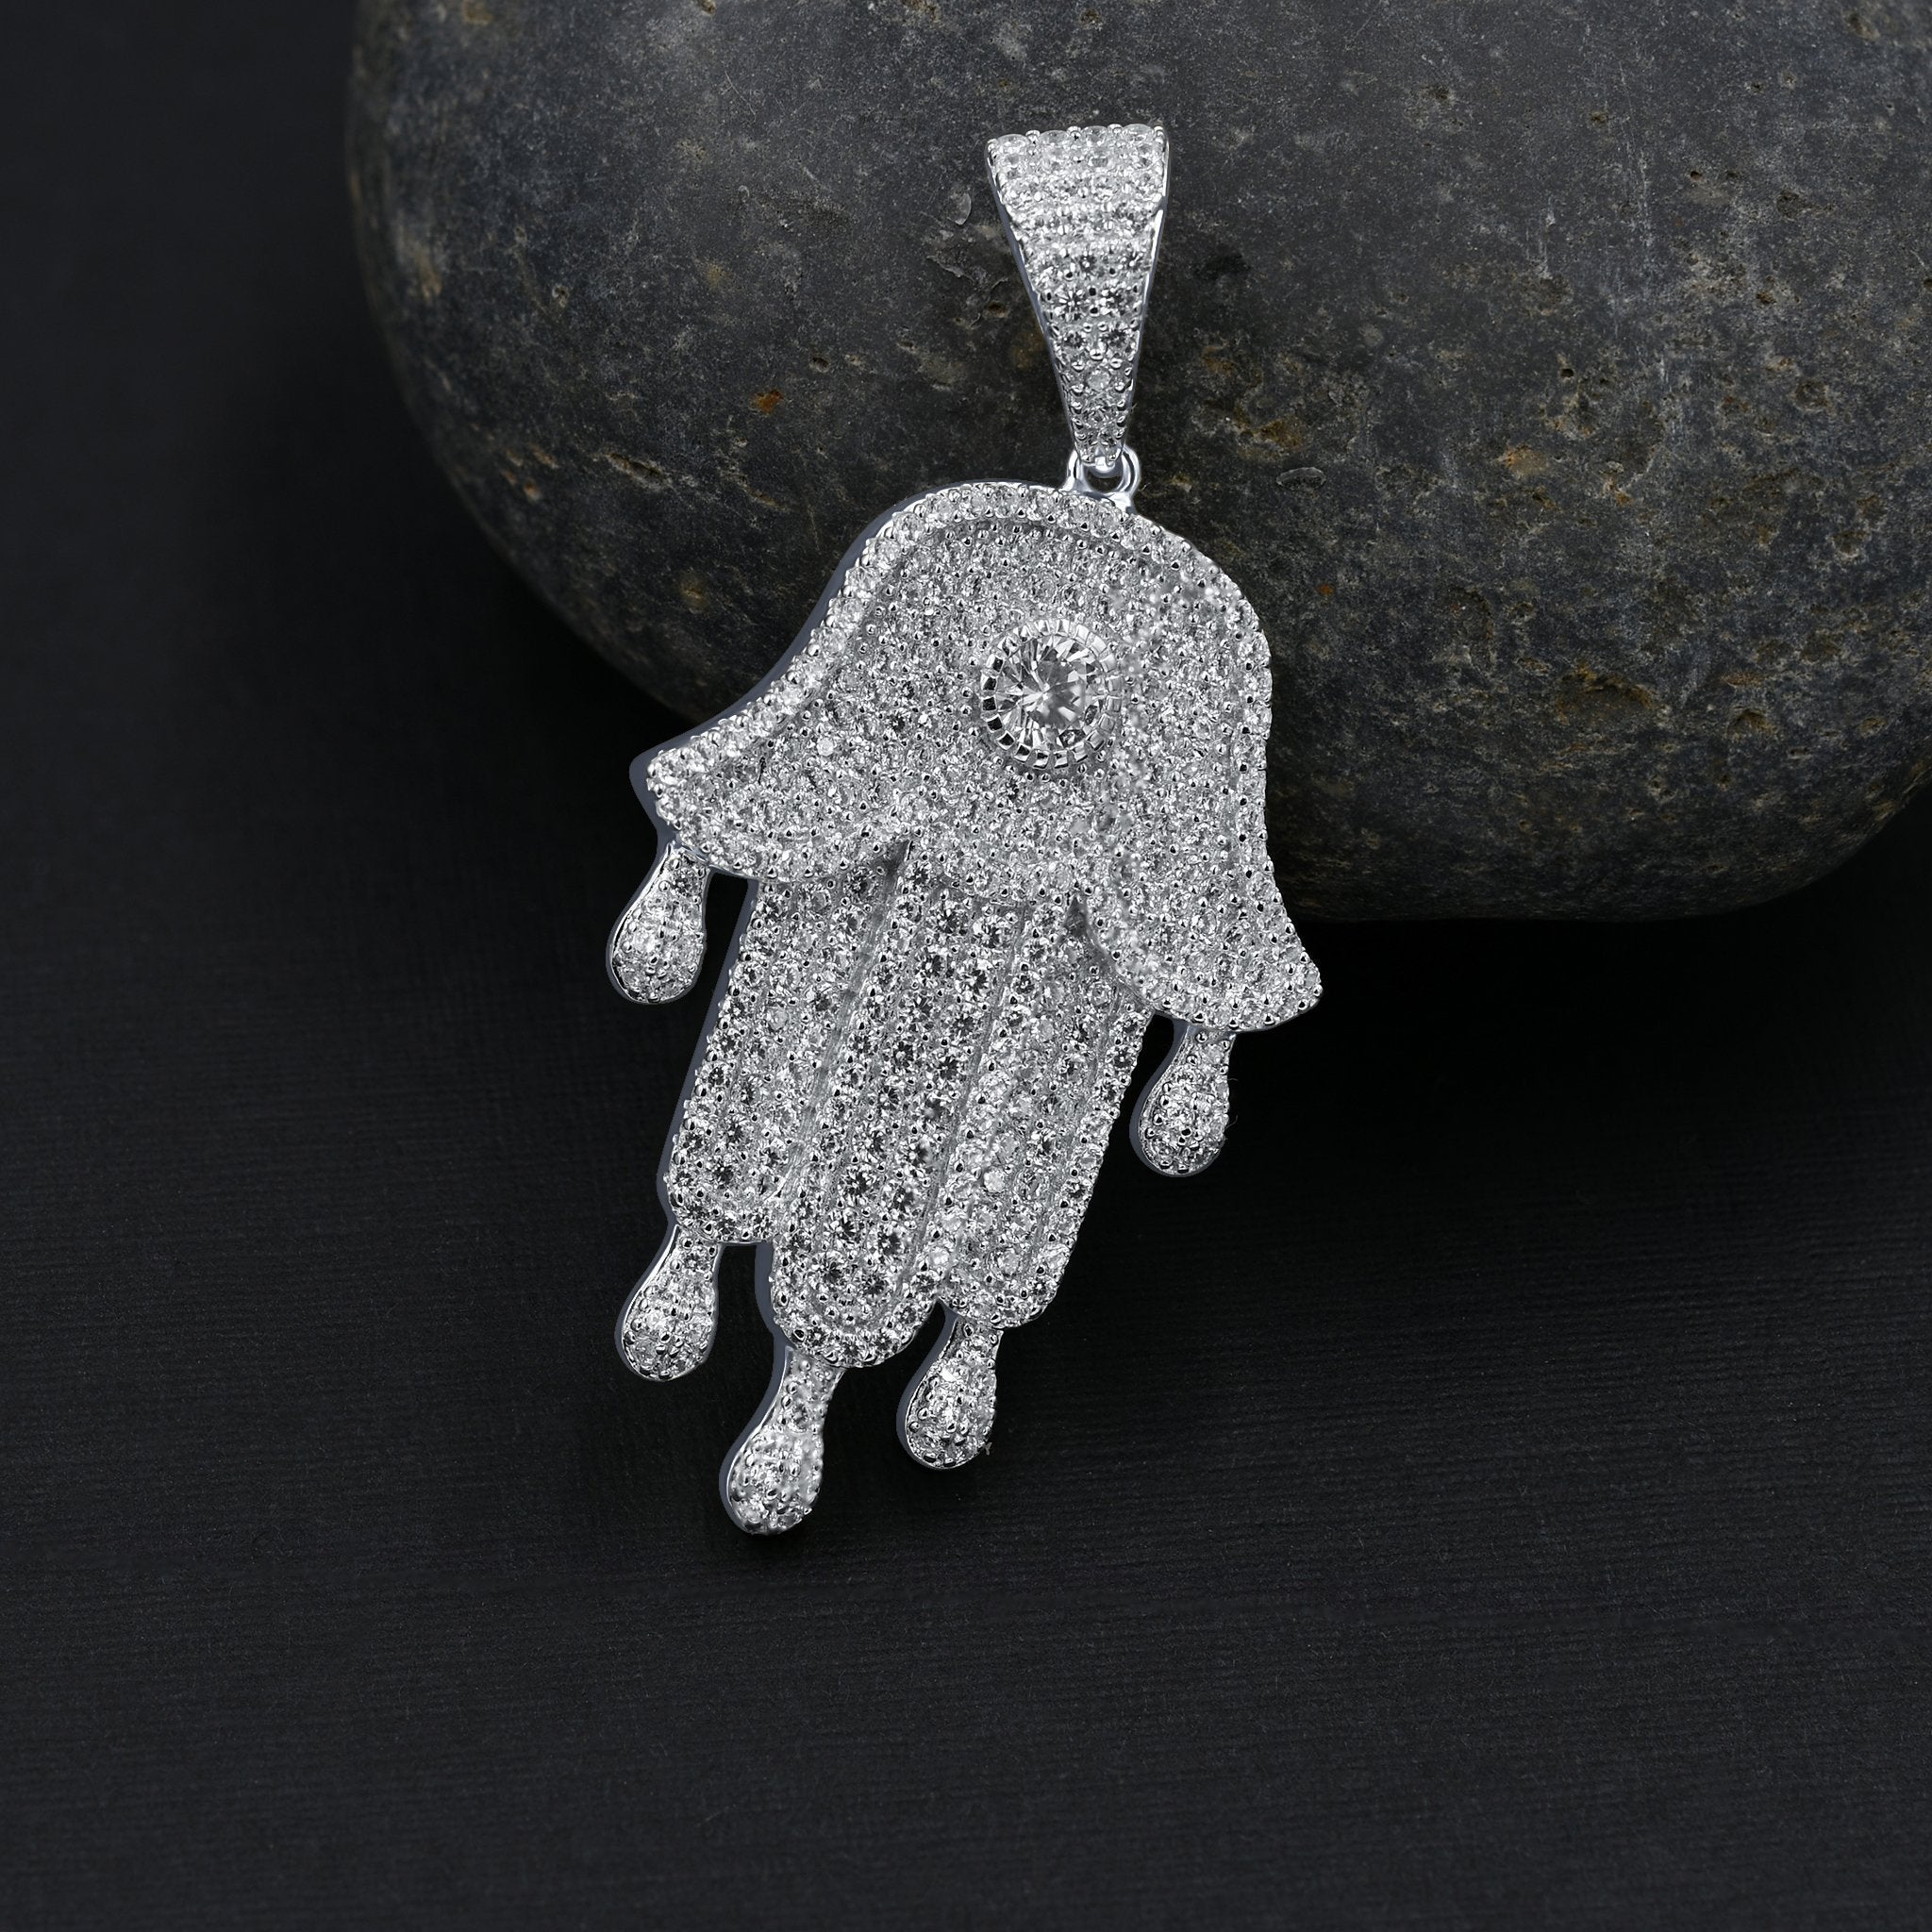 New Arrival: CZ Micropave Silver Pendant - 50% Off - Pendants, Stones & Charms - Bijou Her -  -  - 